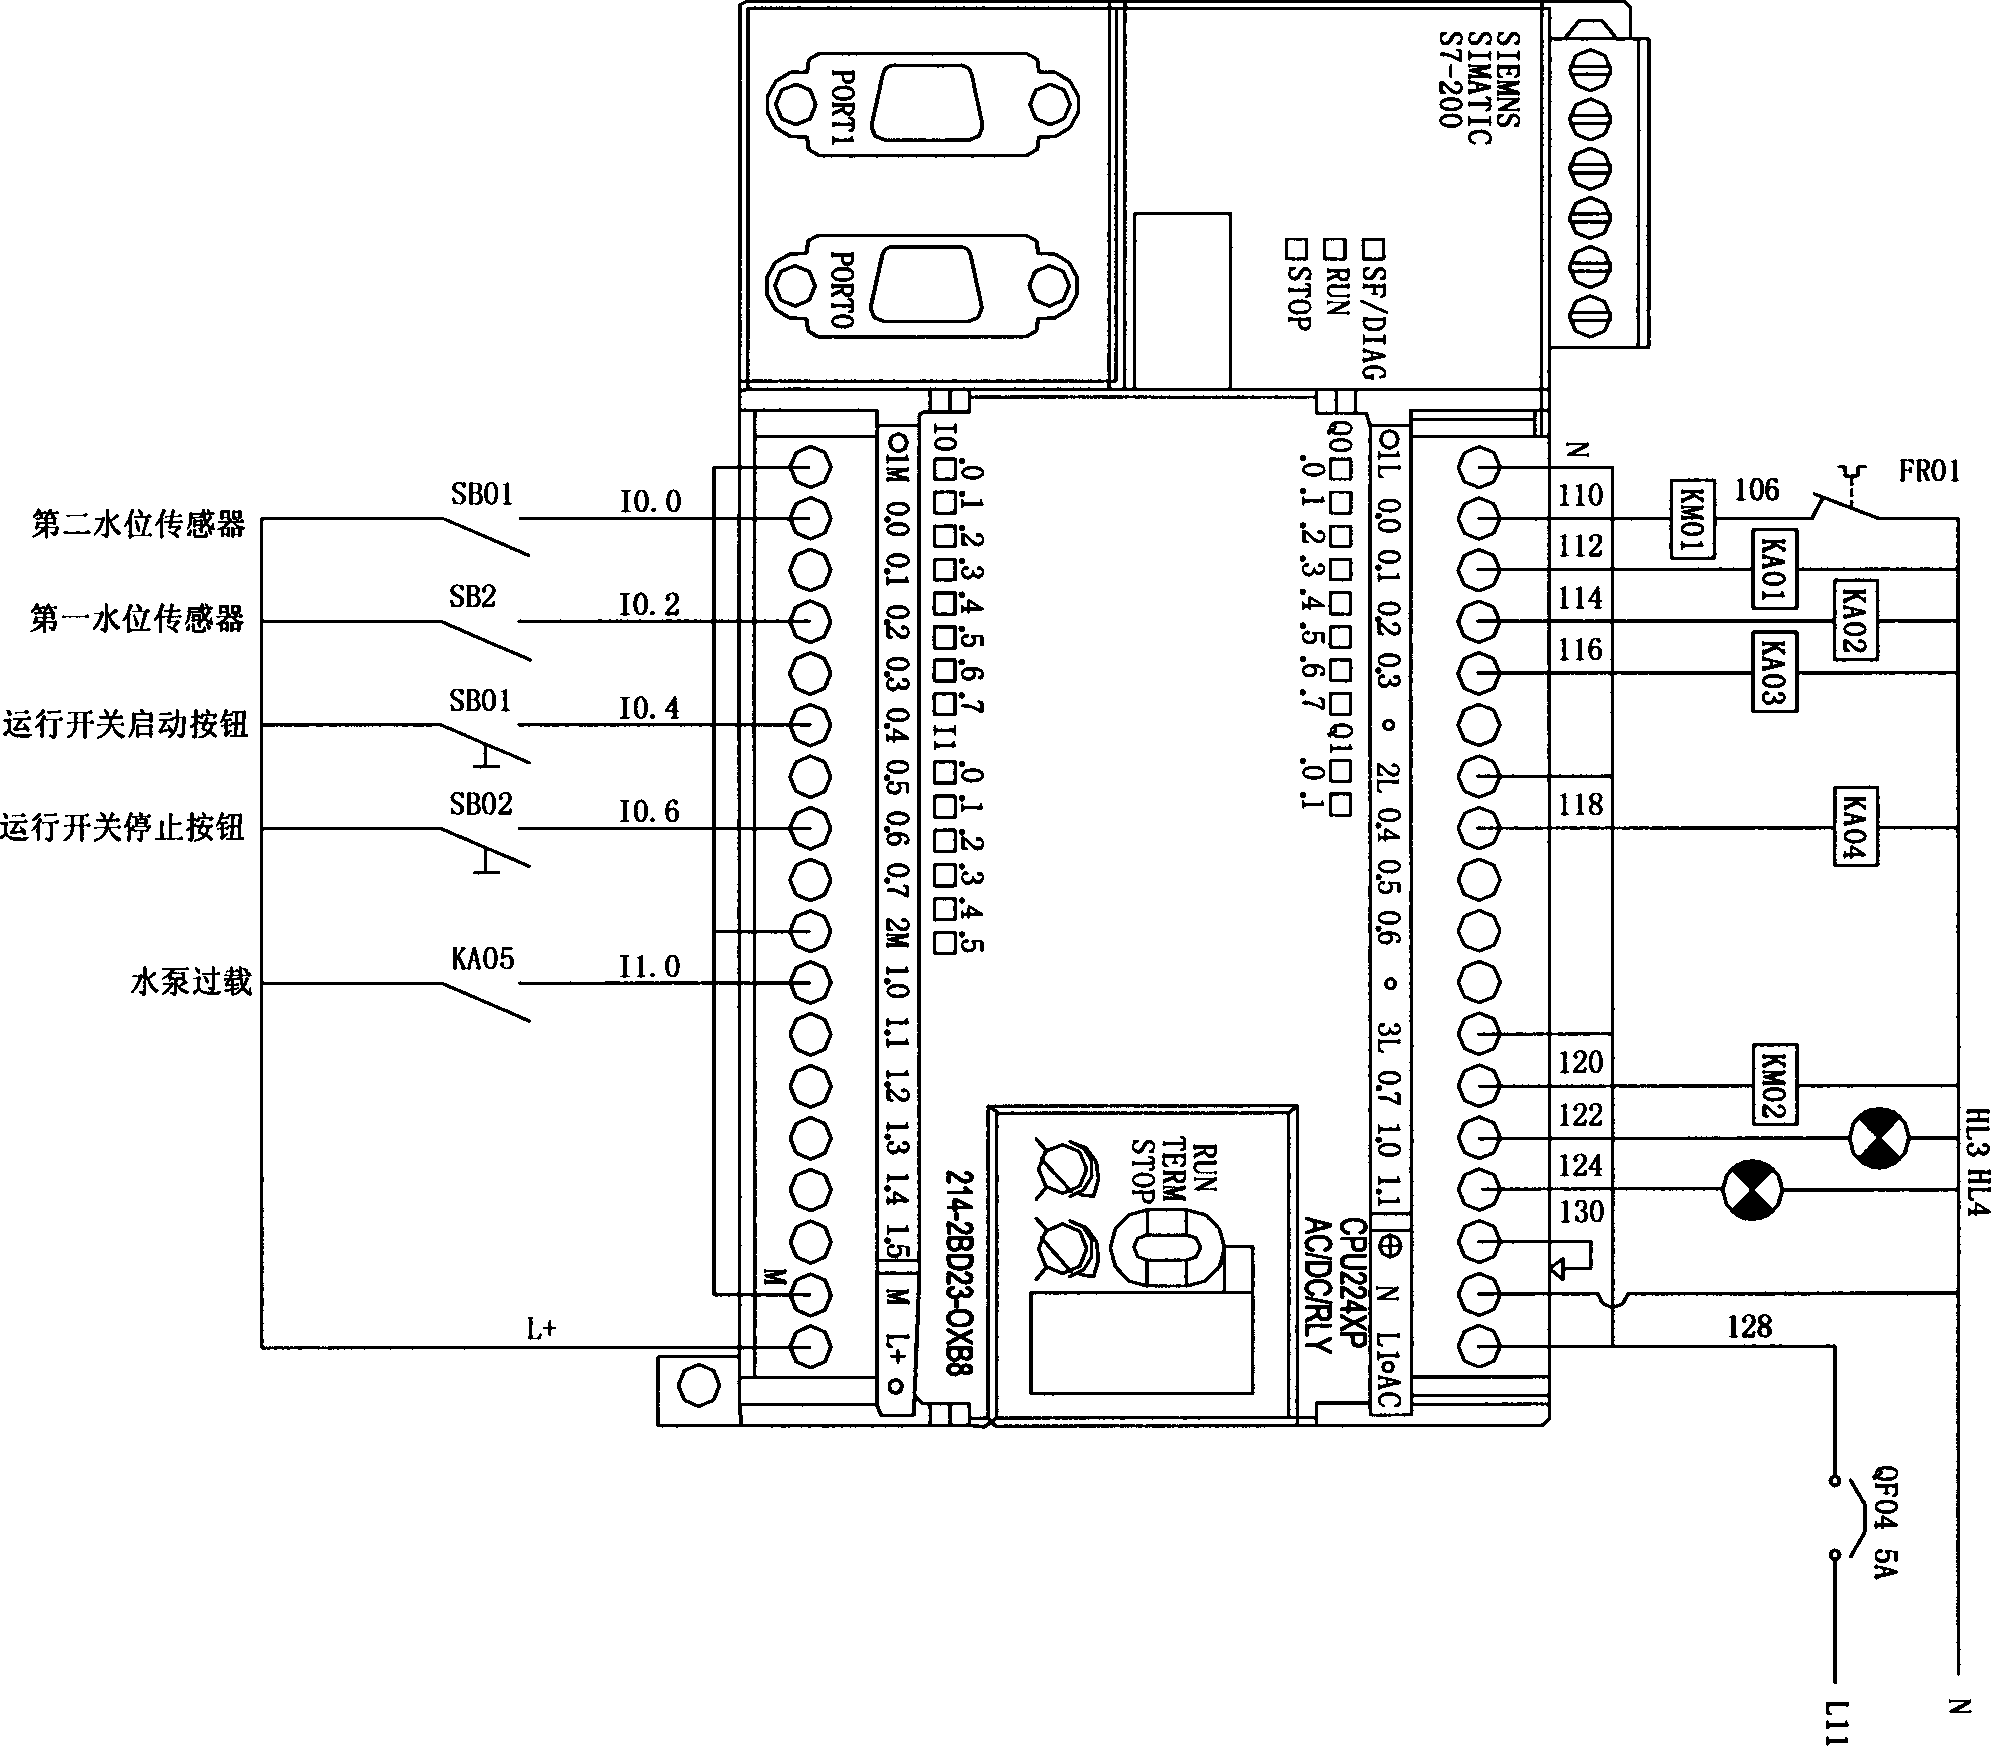 Device based on biological germination process technology and electrical control system